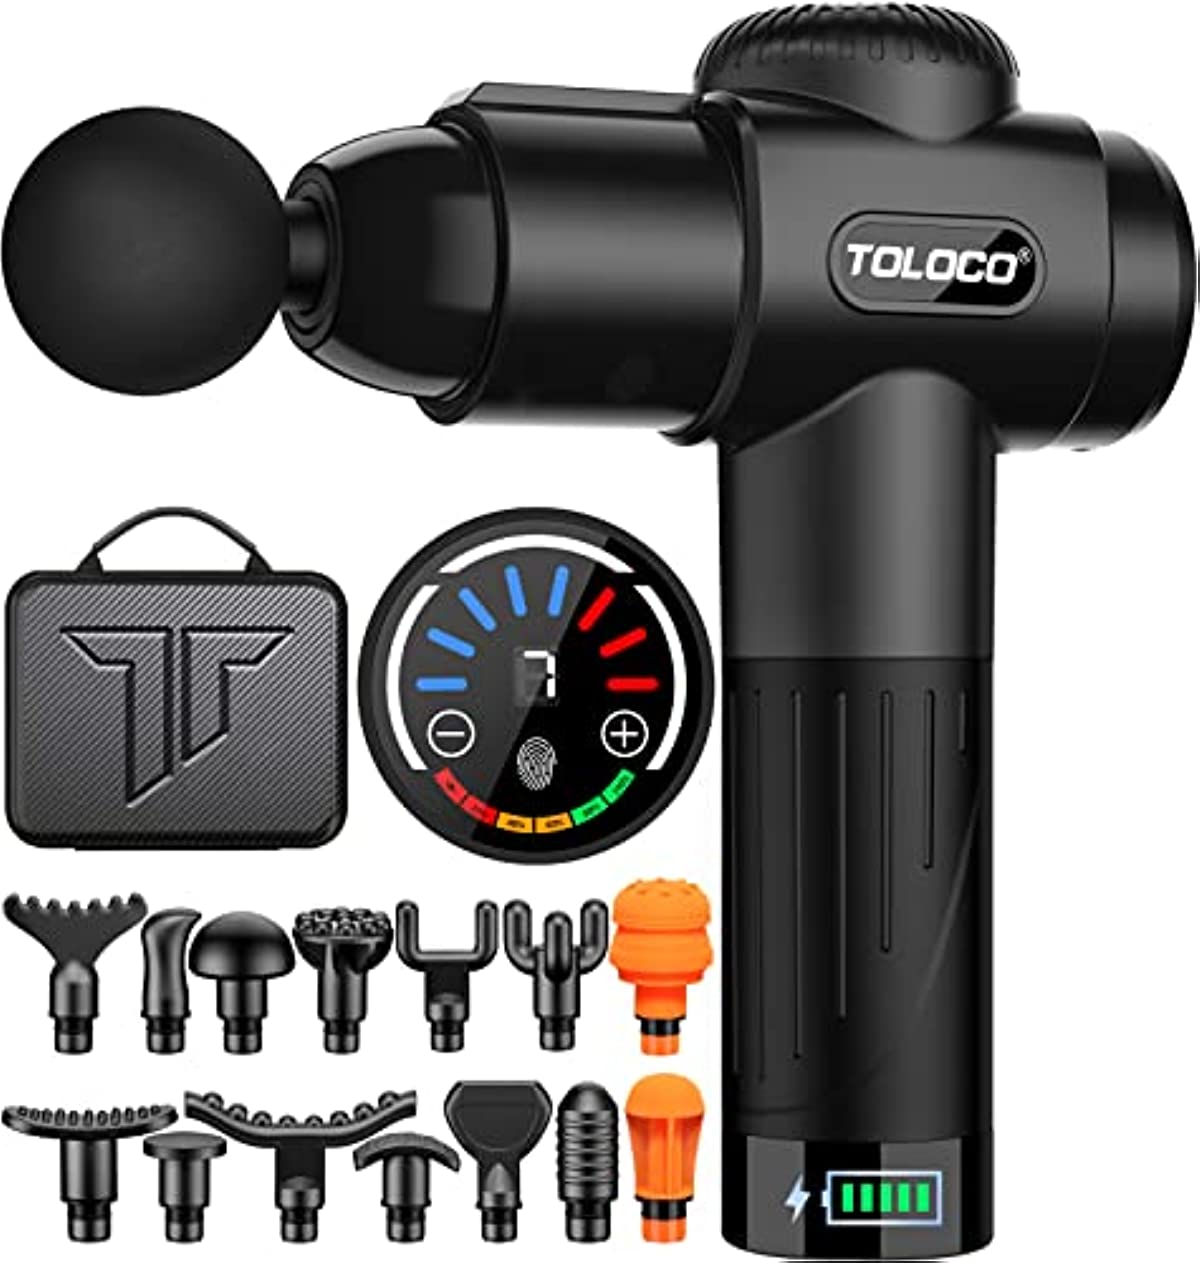 TOLOCO Massage Gun, Muscle Massagers with 15 Interchangeable Heads, Featuring Quiet Glide Technology, Compact Muscle Deep Tissue Treatment for Any Pain Relief, Portable Percussion Massager, Black